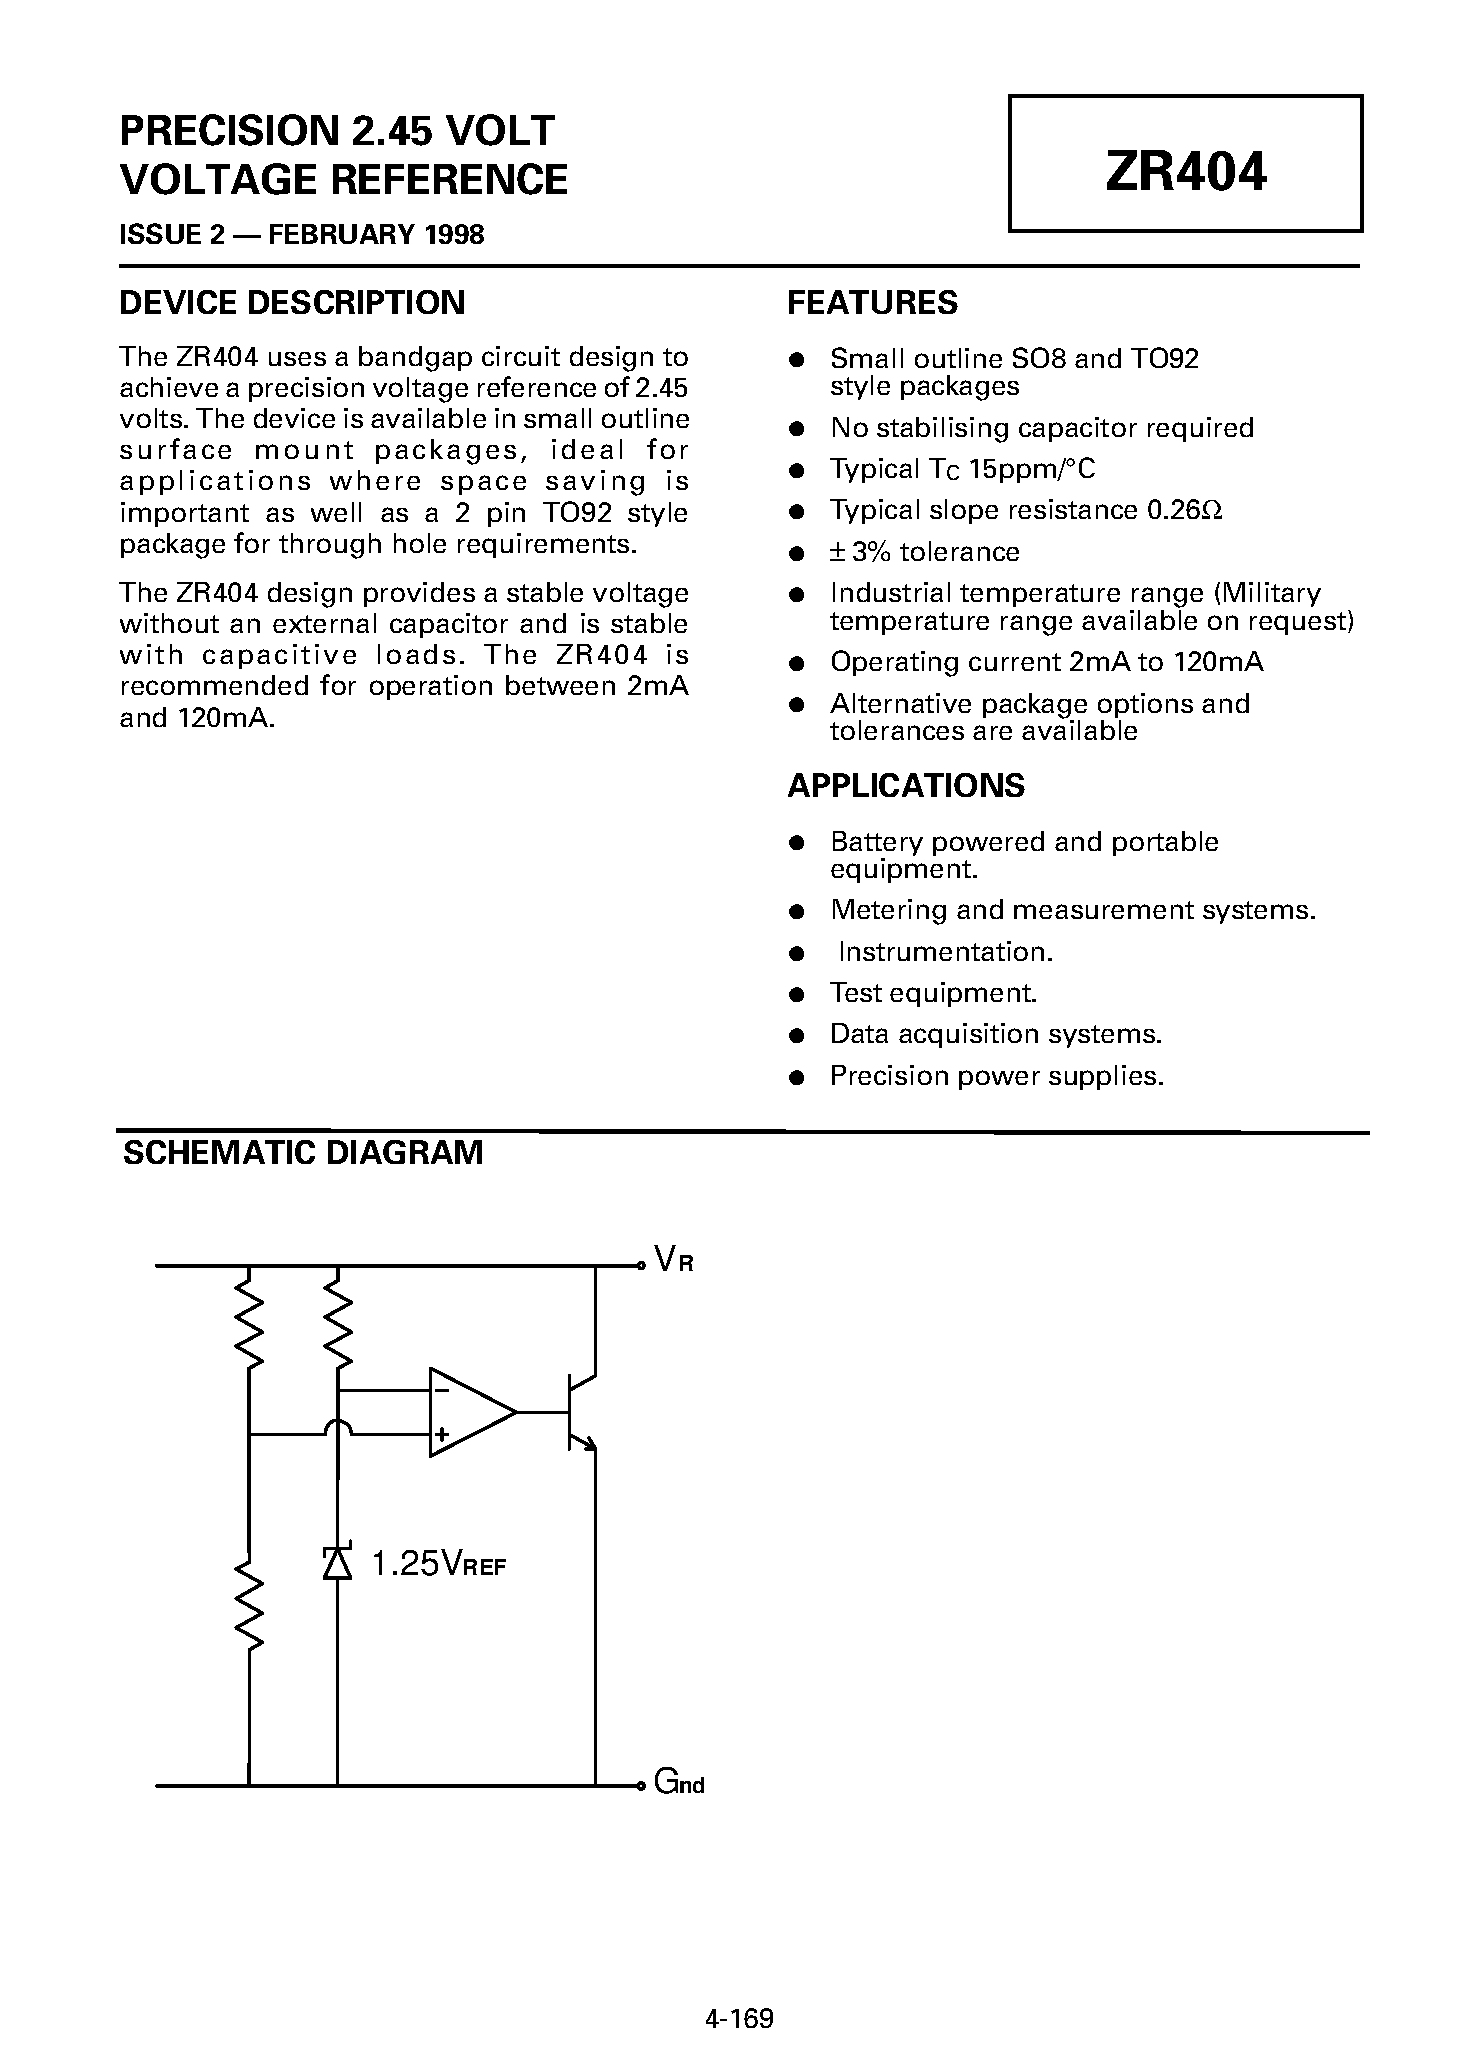 Datasheet ZR404 - PRECISION 2.45 VOLT VOLTAGE REFERENCE page 1